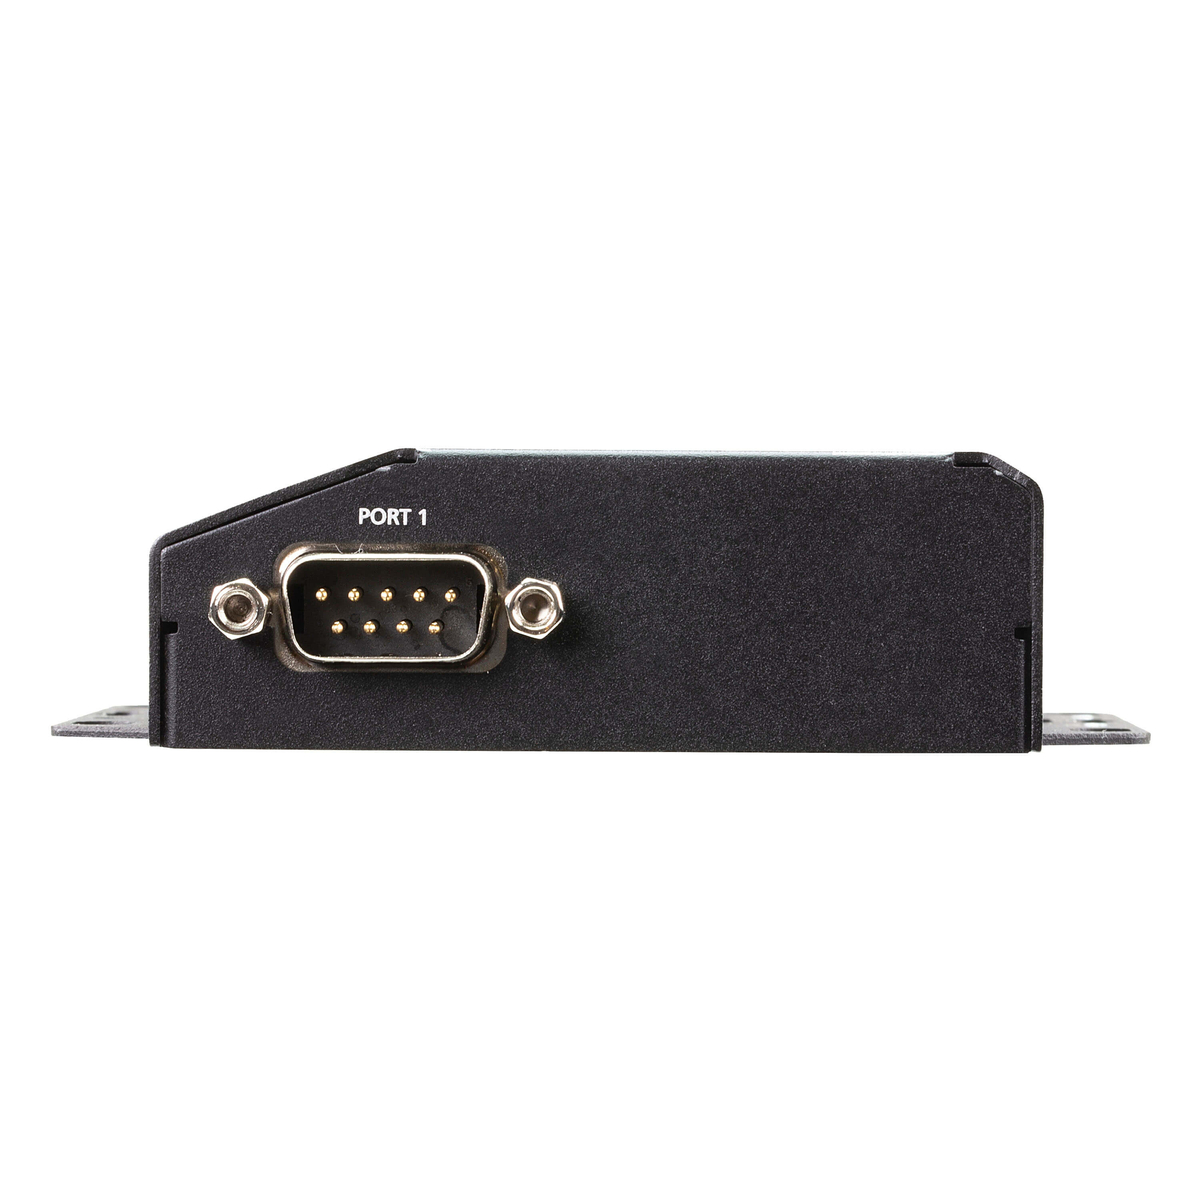 1-Port POE RS-232/422/485 Secure